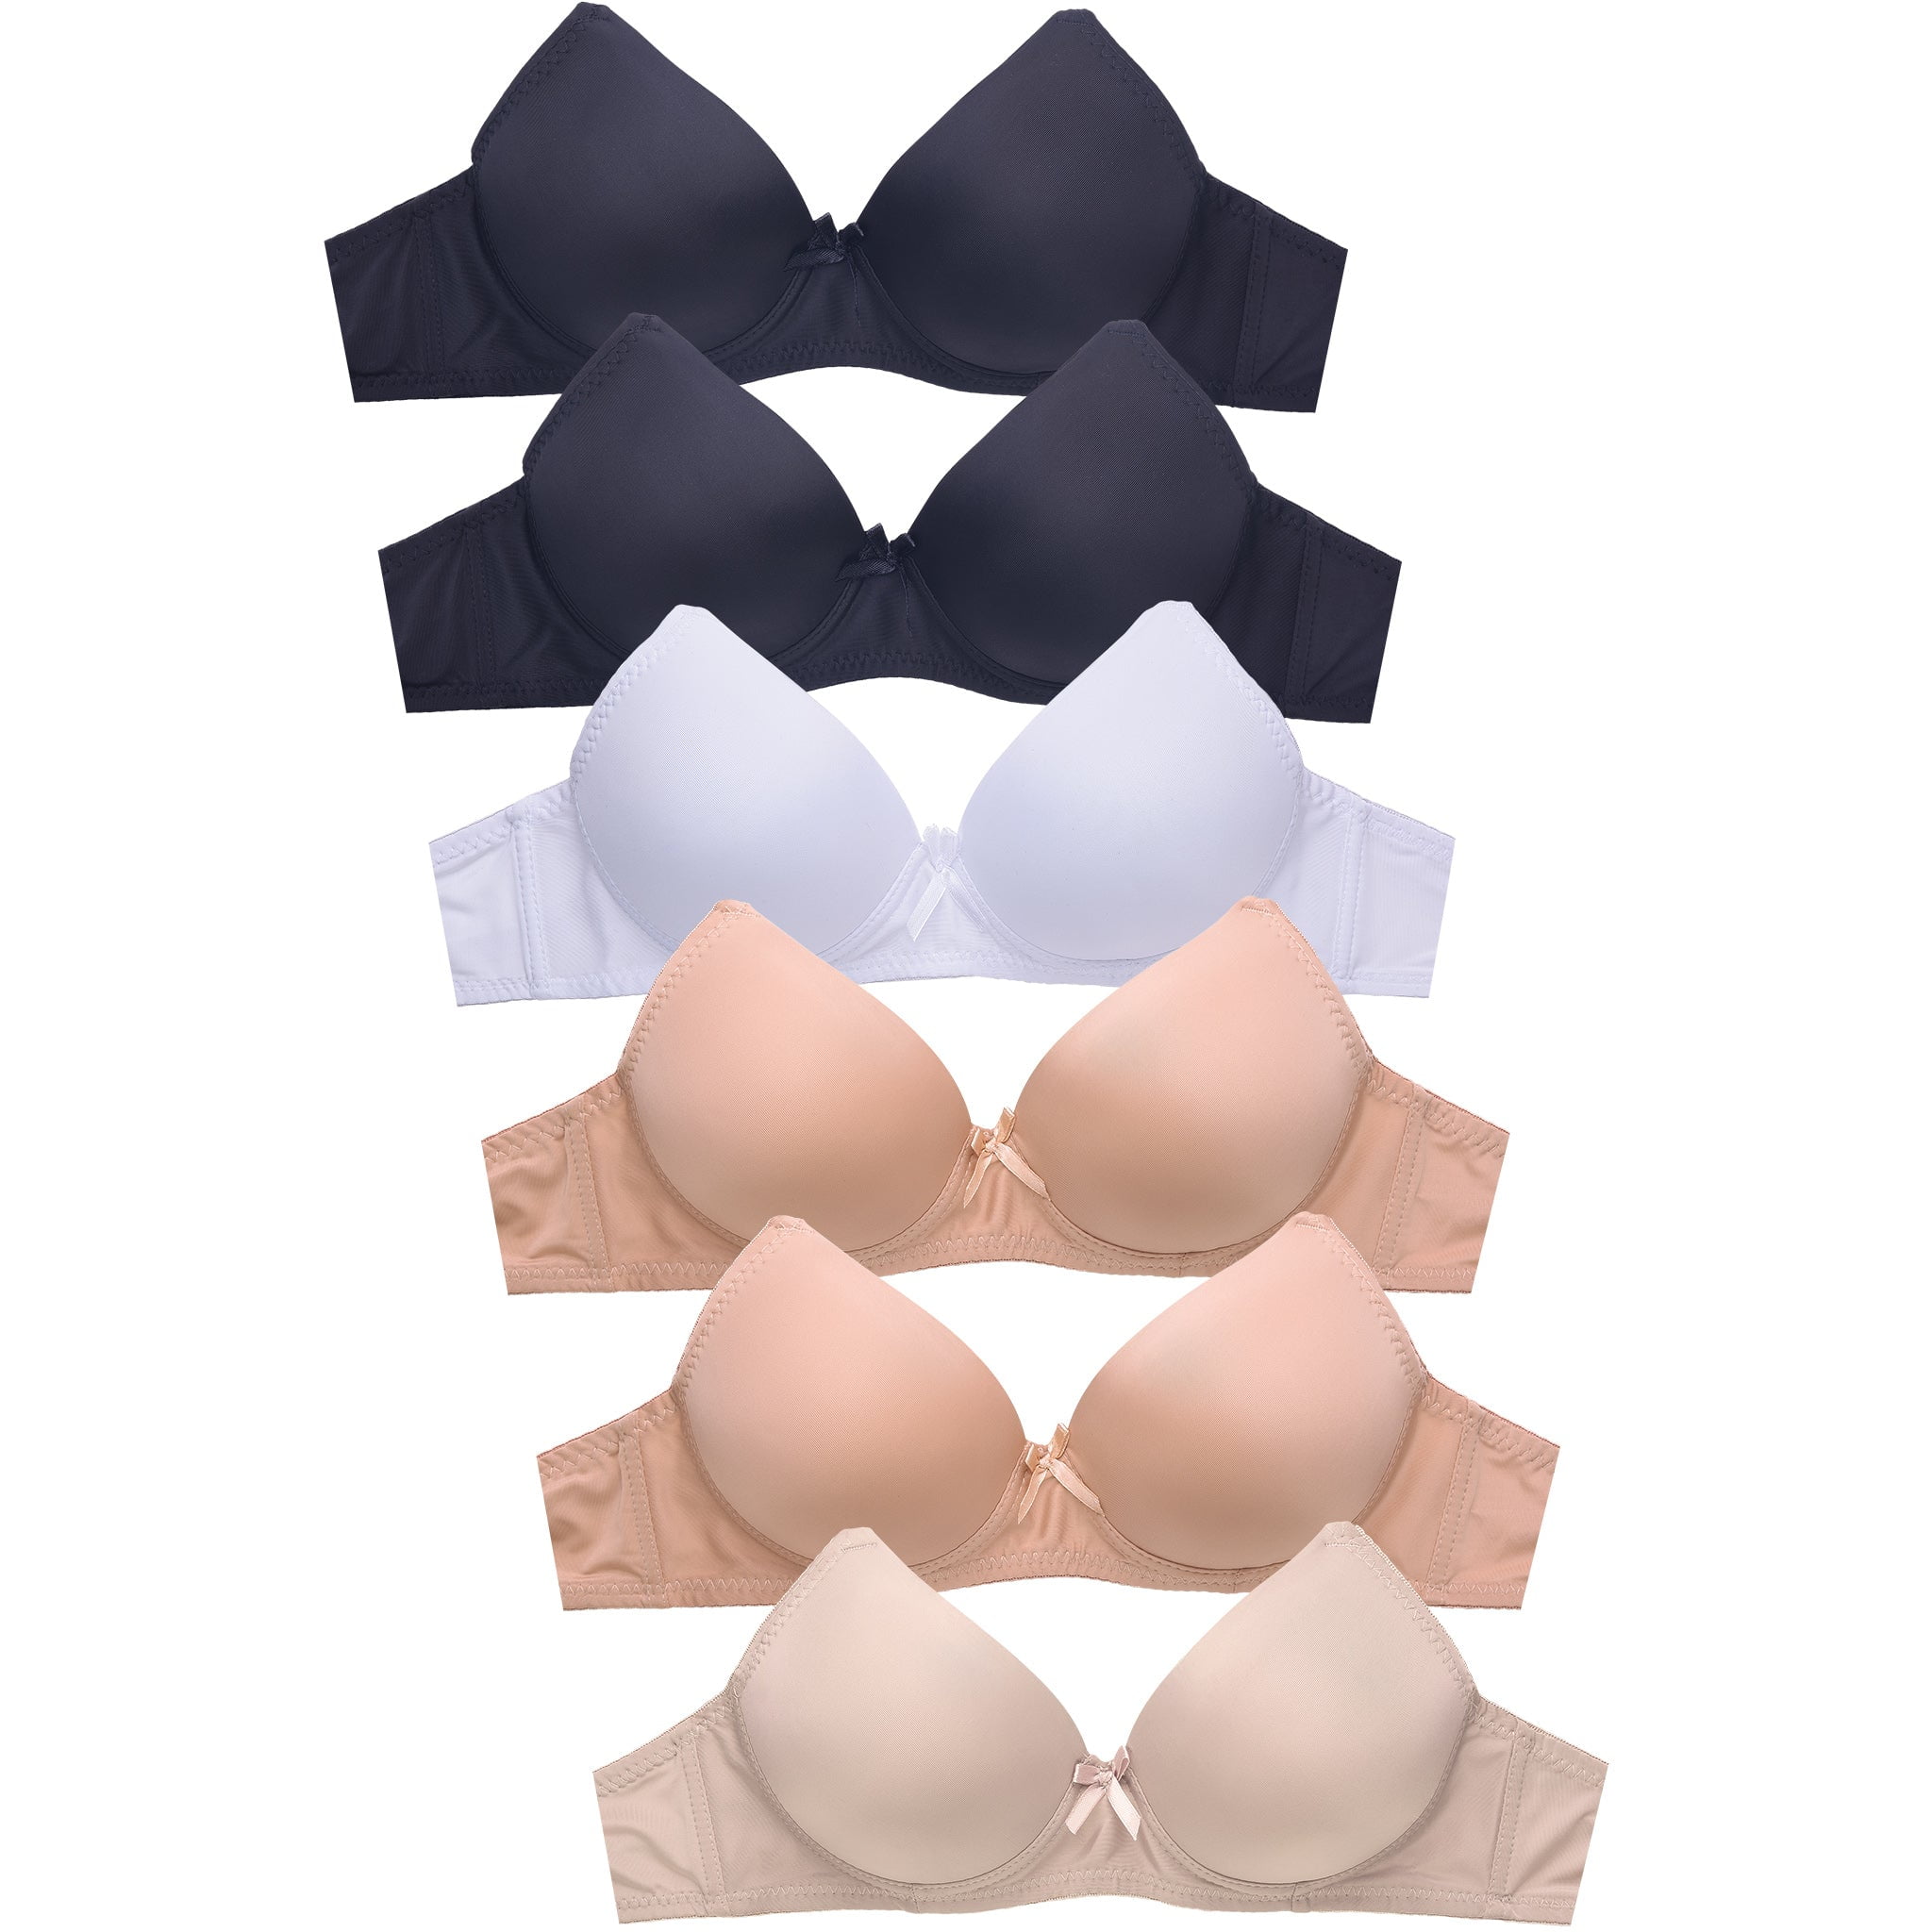 247 Frenzy Women's Essentials Sofra or Mamia PACK OF 6 Full Coverage  Allover Lace Bras 